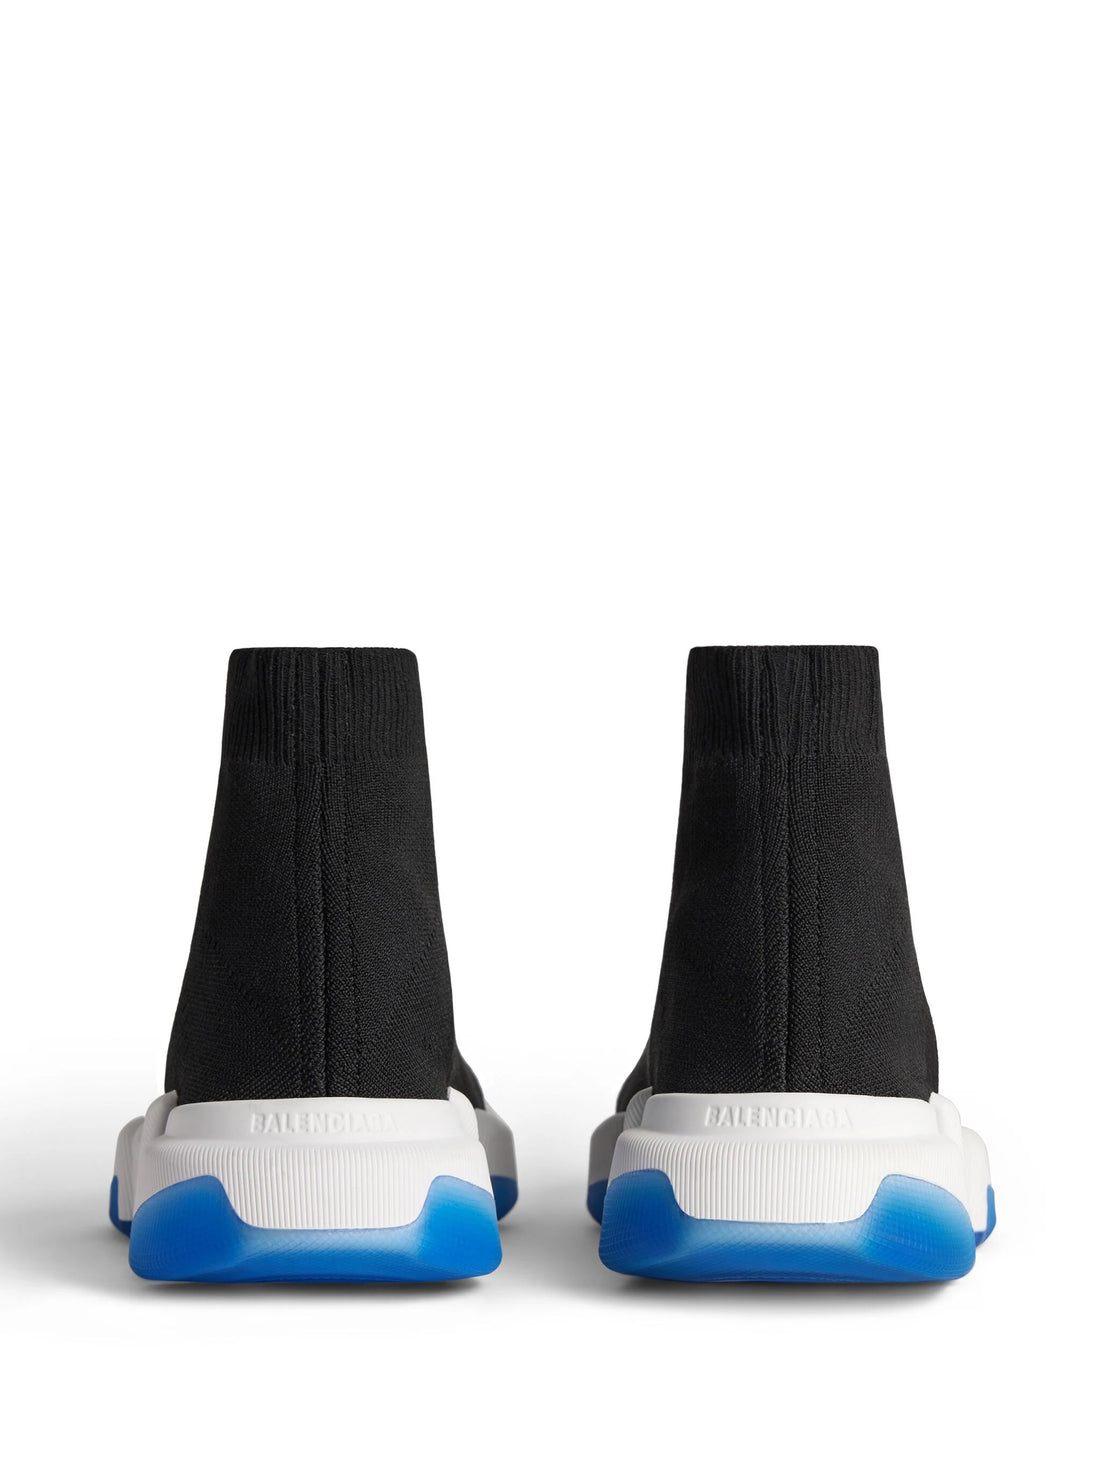 BALENCIAGA Speed 2.0 Clear Sole Recycled Knit Sneakers Black/White/Blue - MAISONDEFASHION.COM